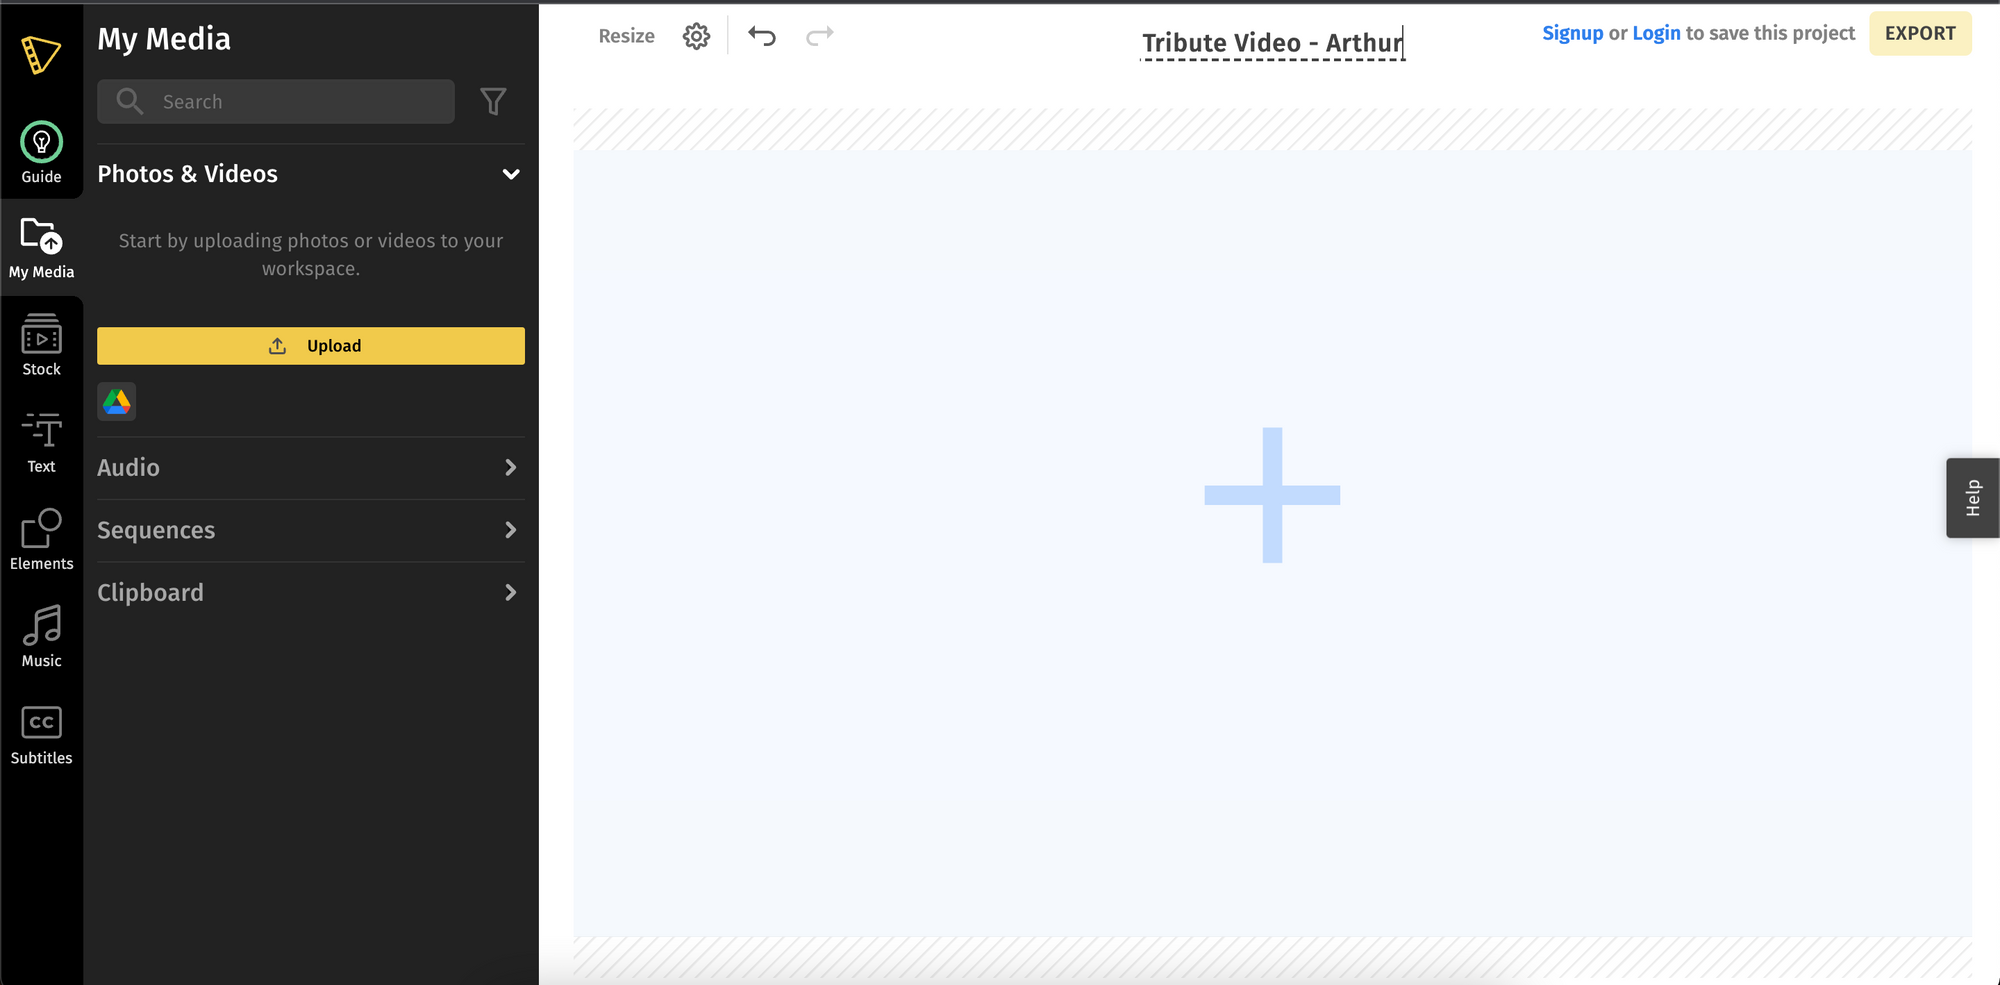 Get started with Typito for free. Create a new project and upload your images and video clips